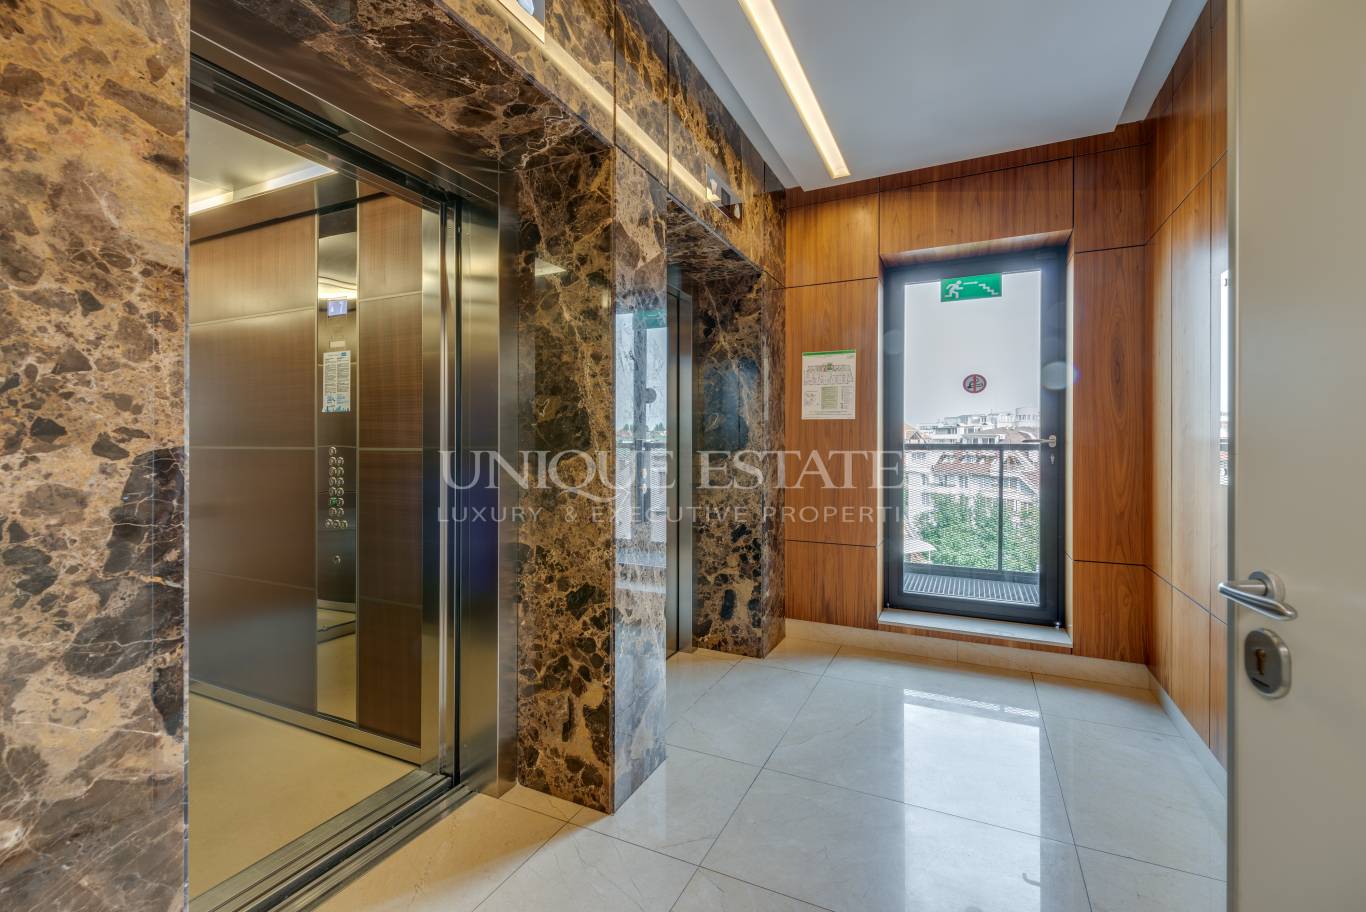 Office for rent in Sofia, Hladilnika with listing ID: K13980 - image 2